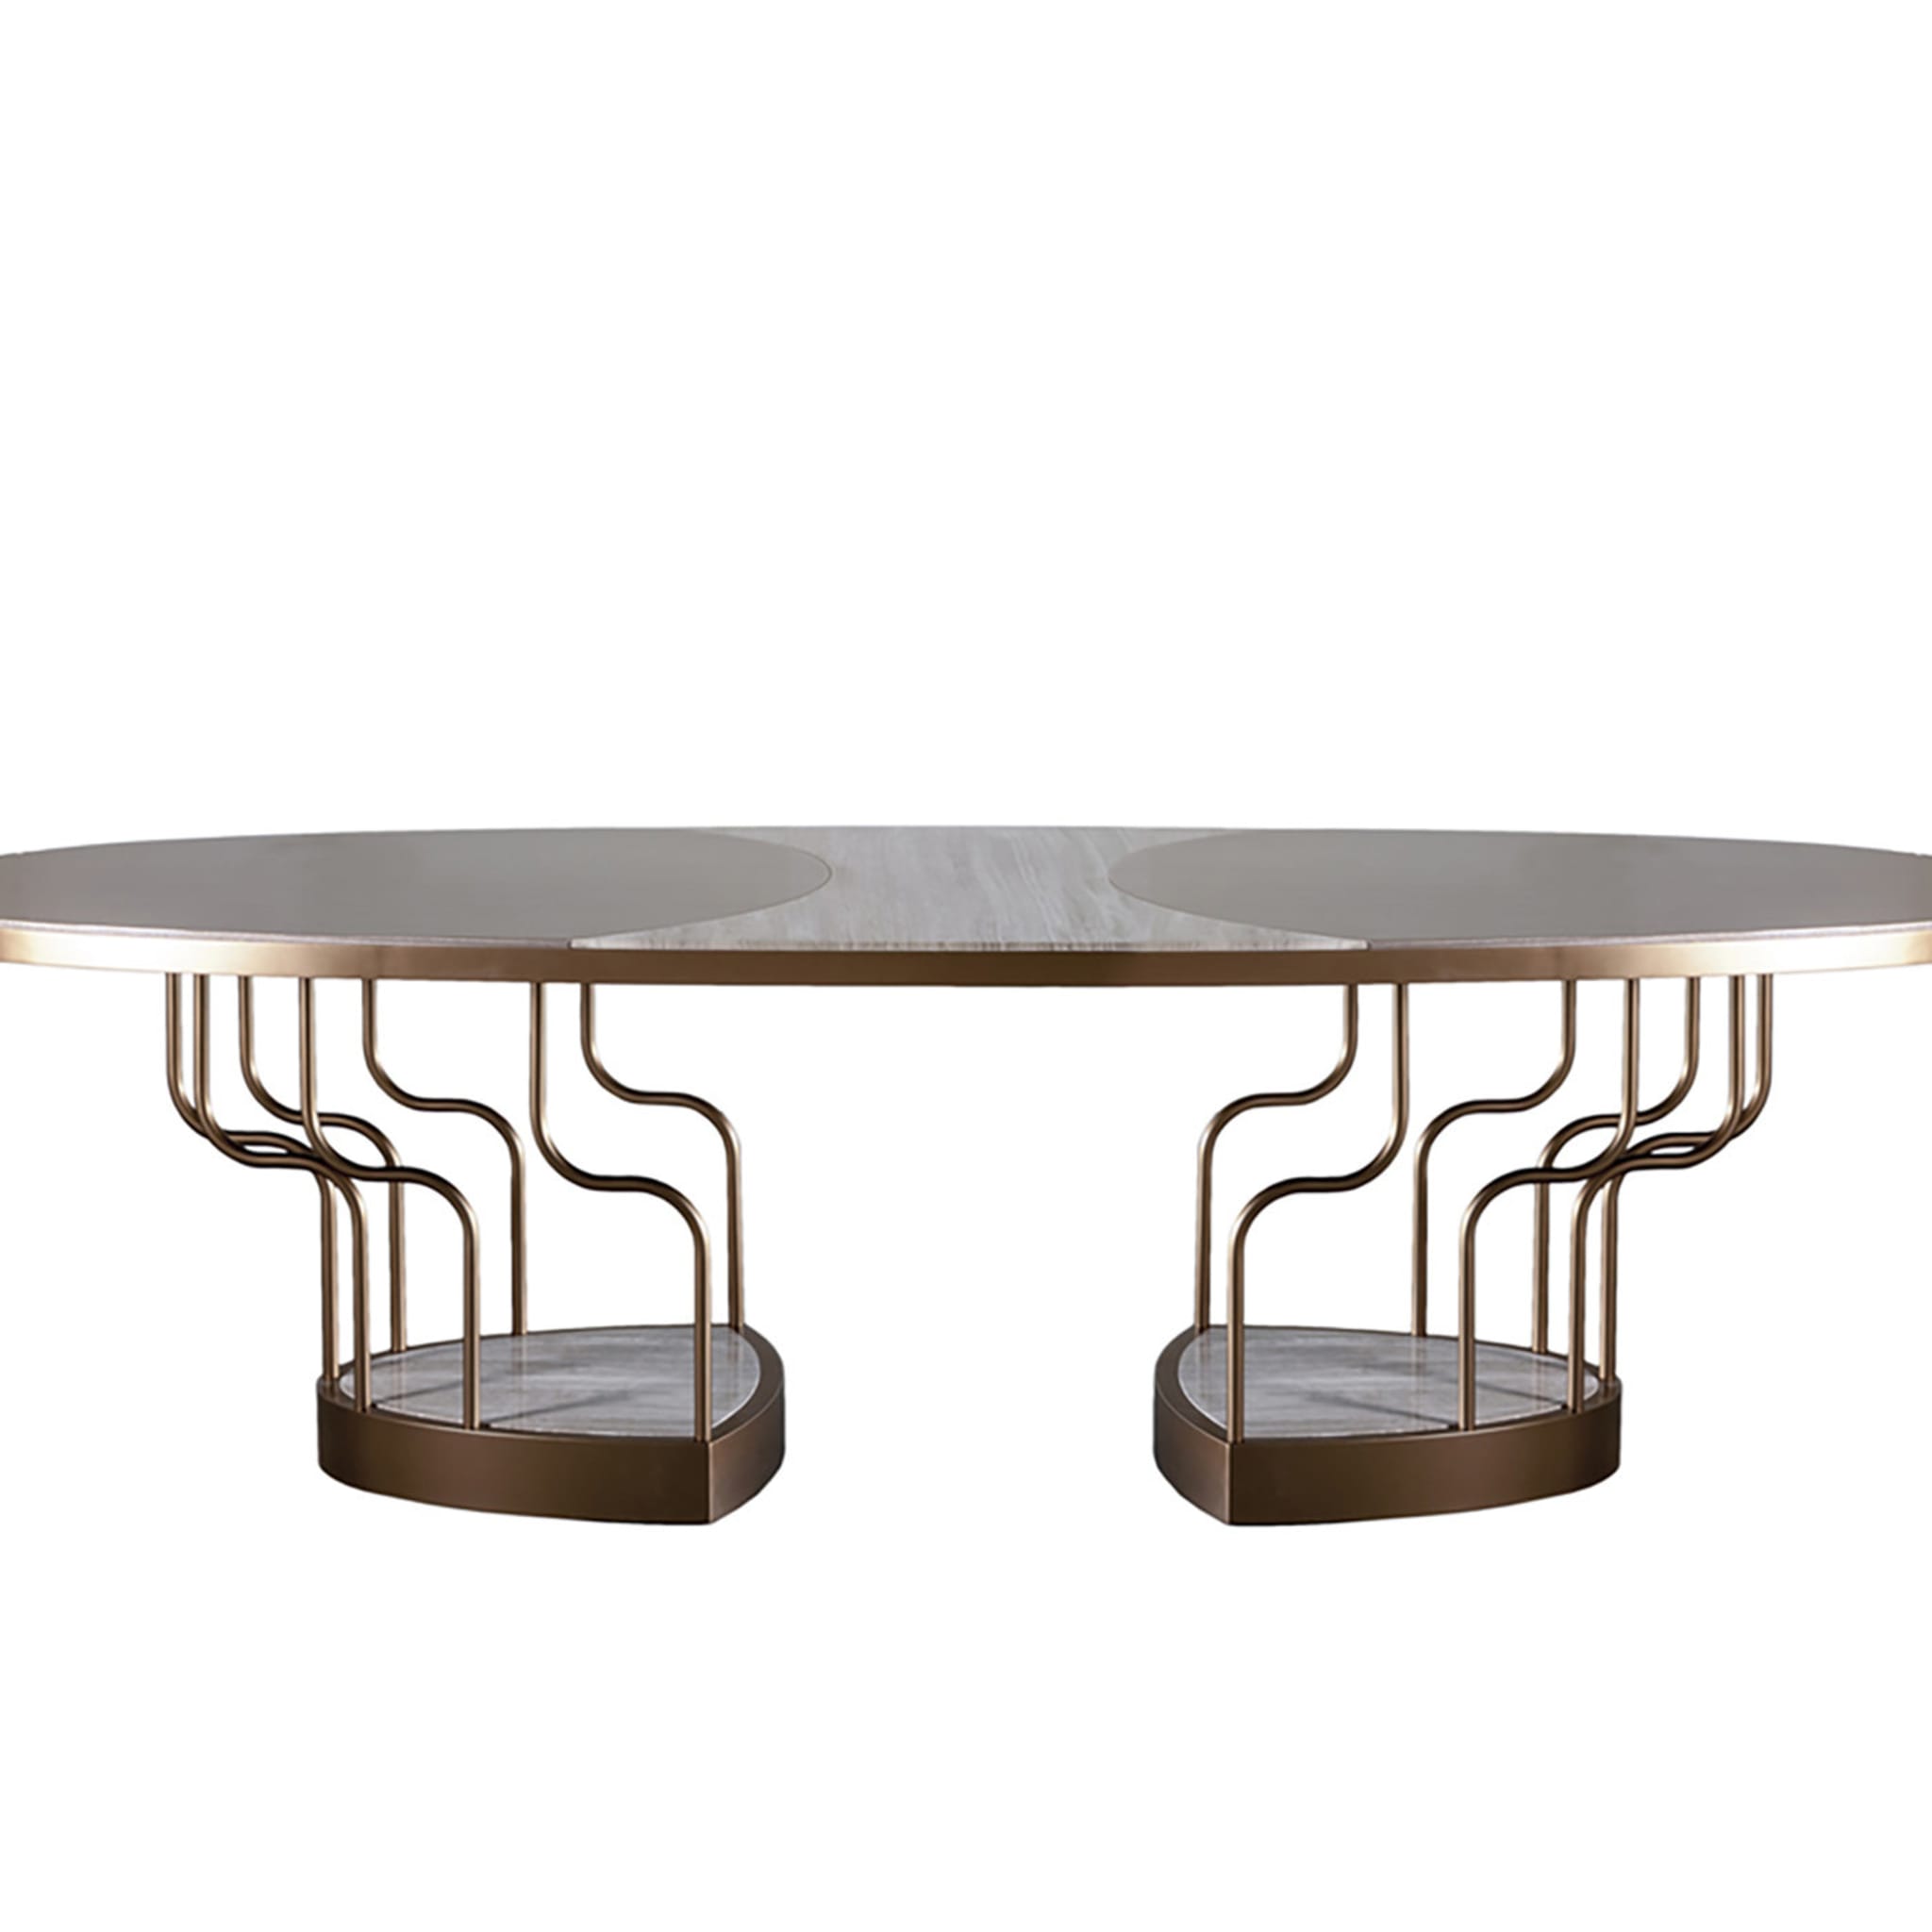 Bloom Oval Dining Table - Alternative view 2